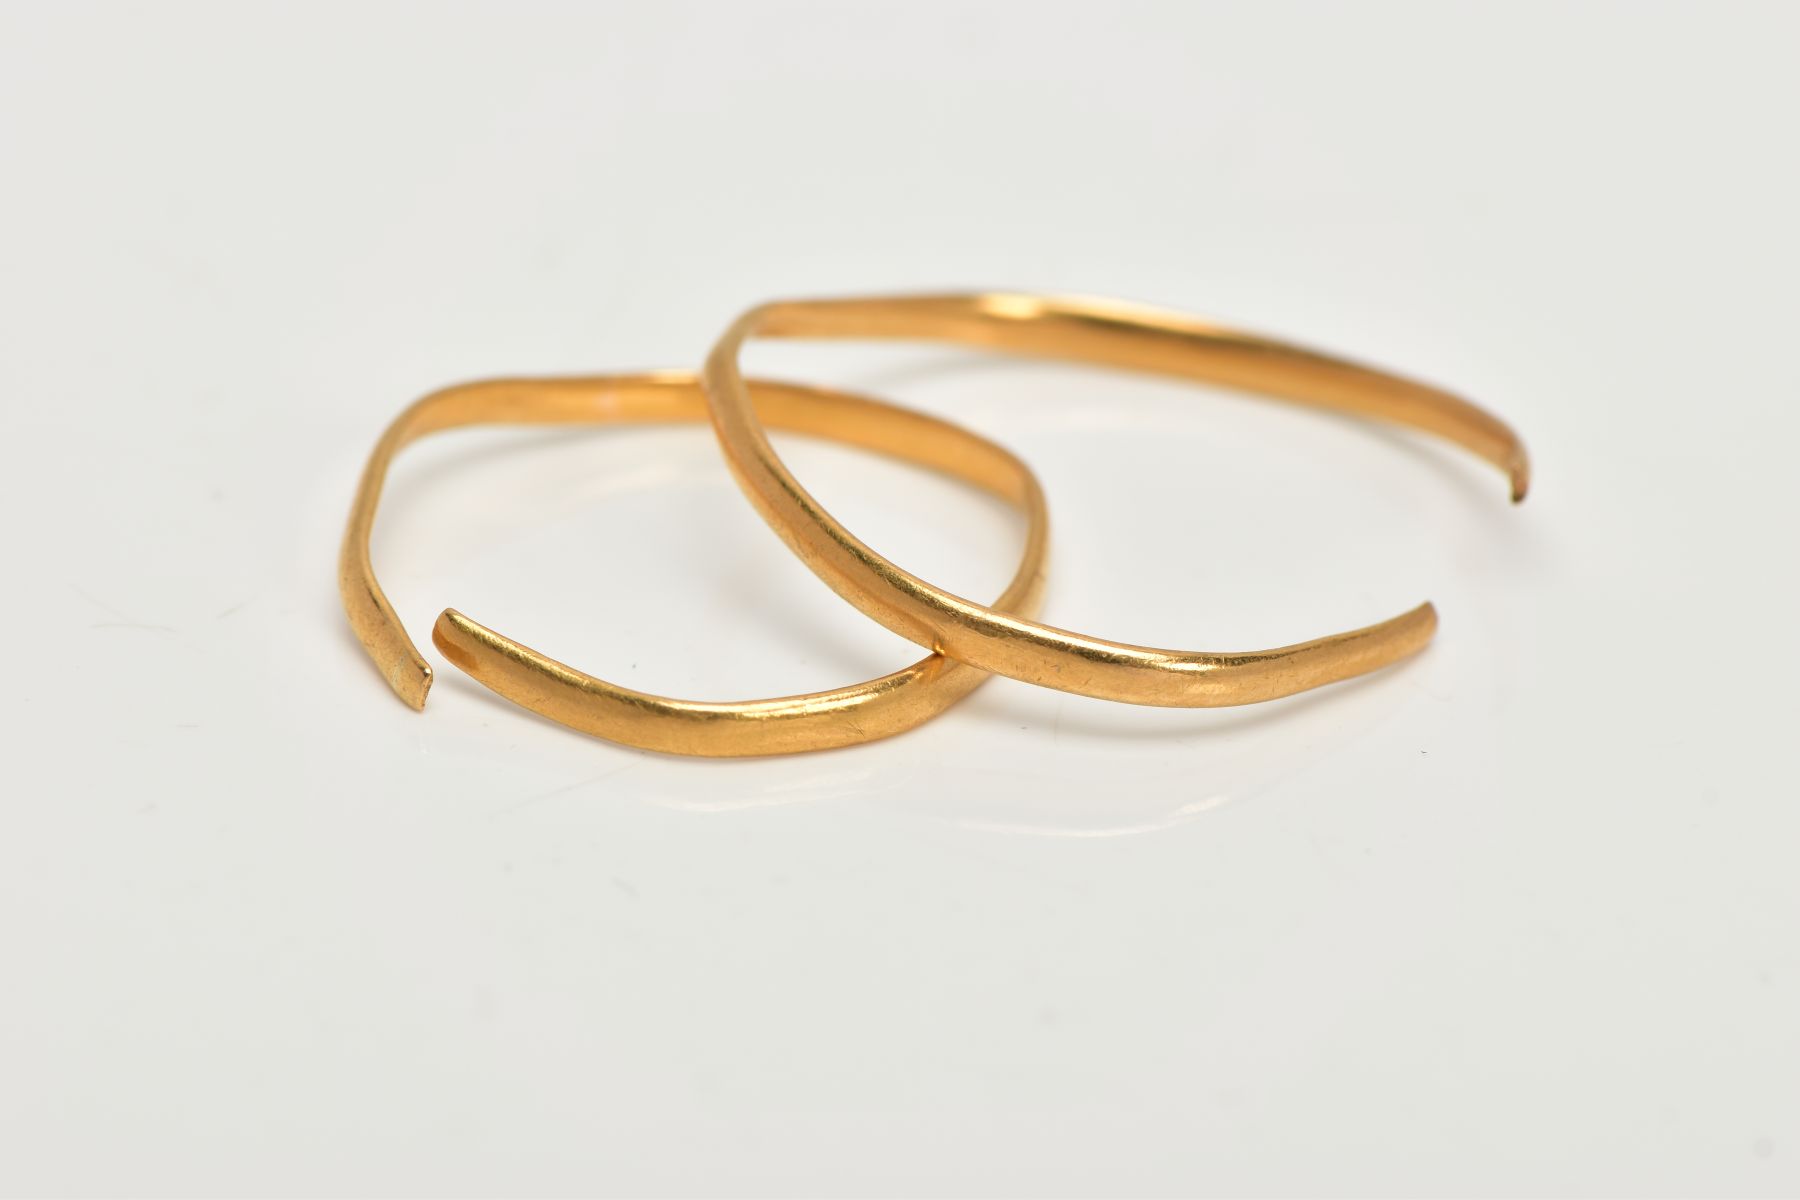 TWO AF THIN GOLD BAND RINGS, the first a thin band ring, with a split shank hallmarked 22ct